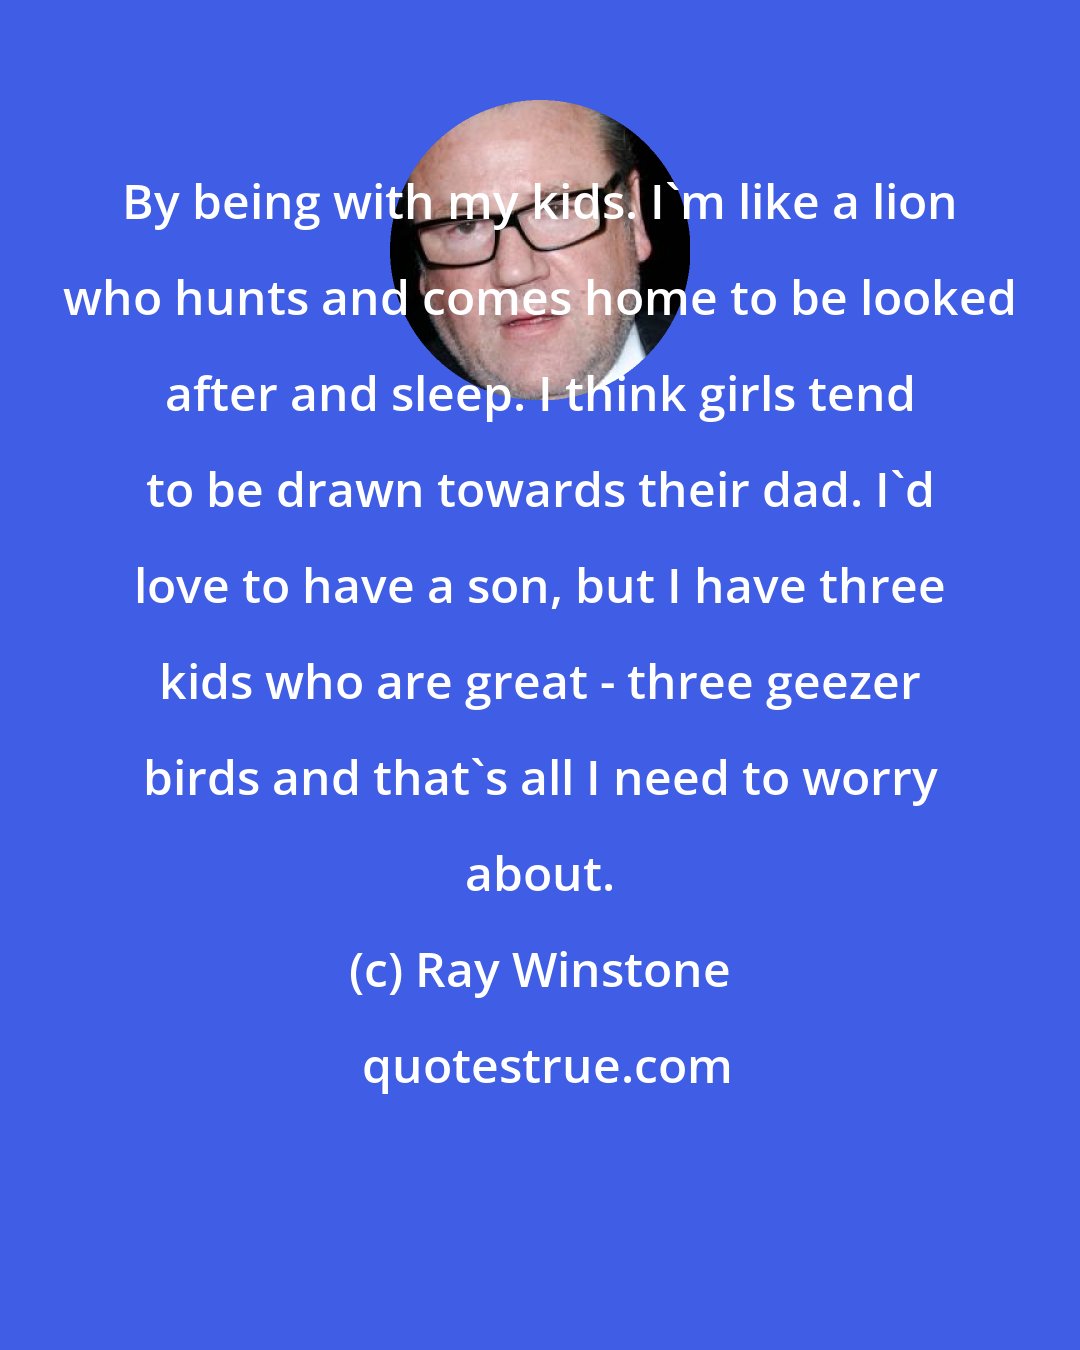 Ray Winstone: By being with my kids. I'm like a lion who hunts and comes home to be looked after and sleep. I think girls tend to be drawn towards their dad. I'd love to have a son, but I have three kids who are great - three geezer birds and that's all I need to worry about.